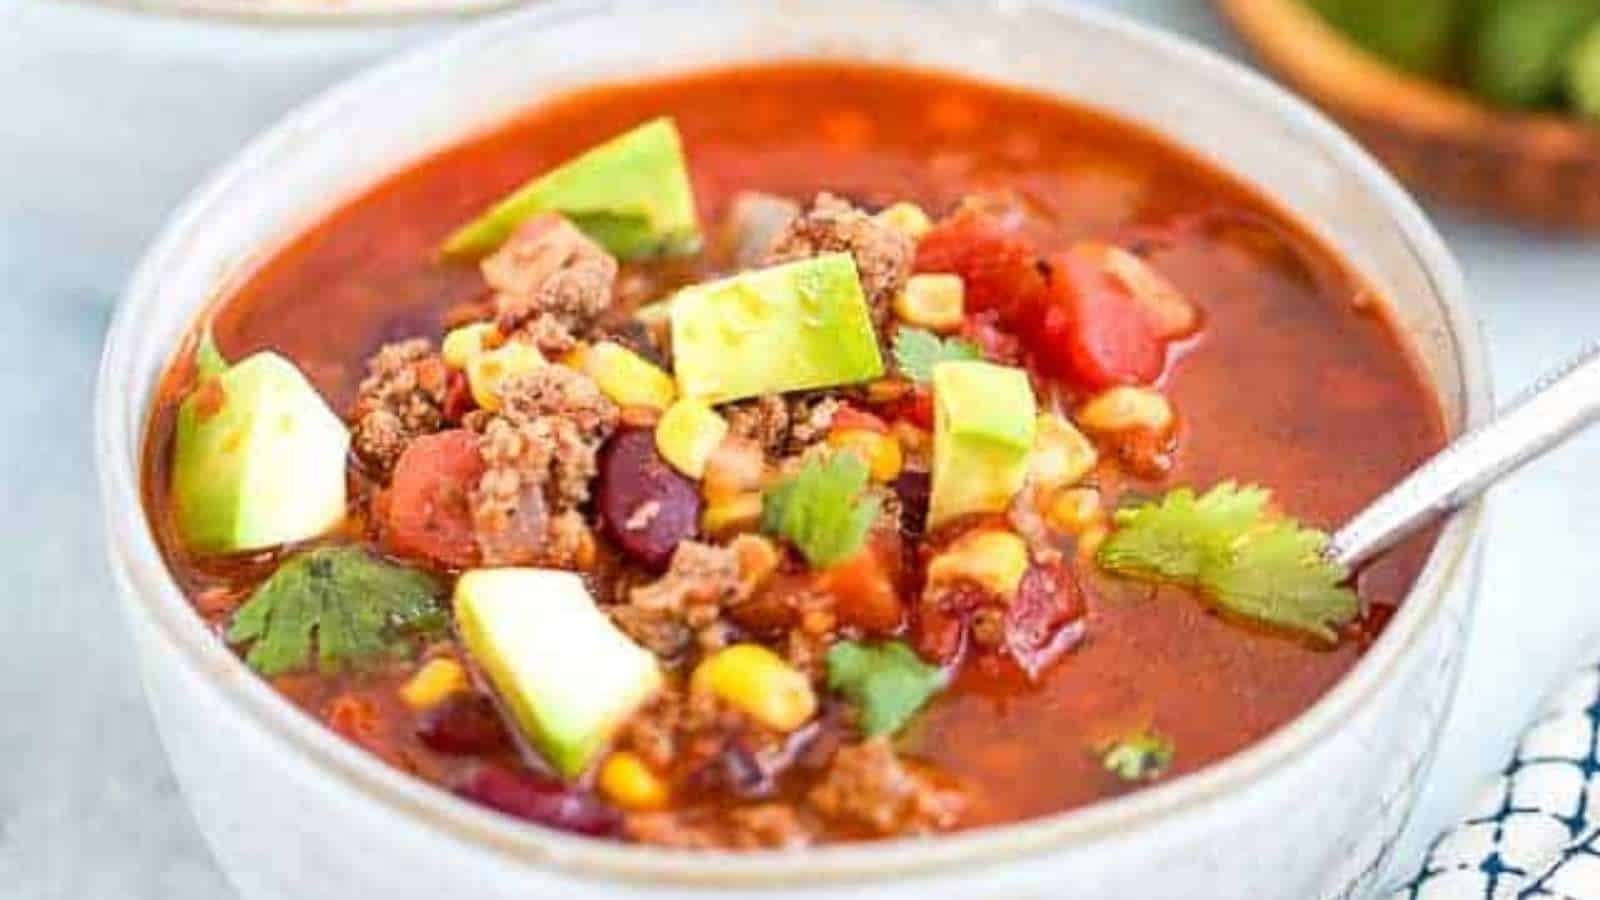 Chili in a bowl with avocado, tomatoes and corn.